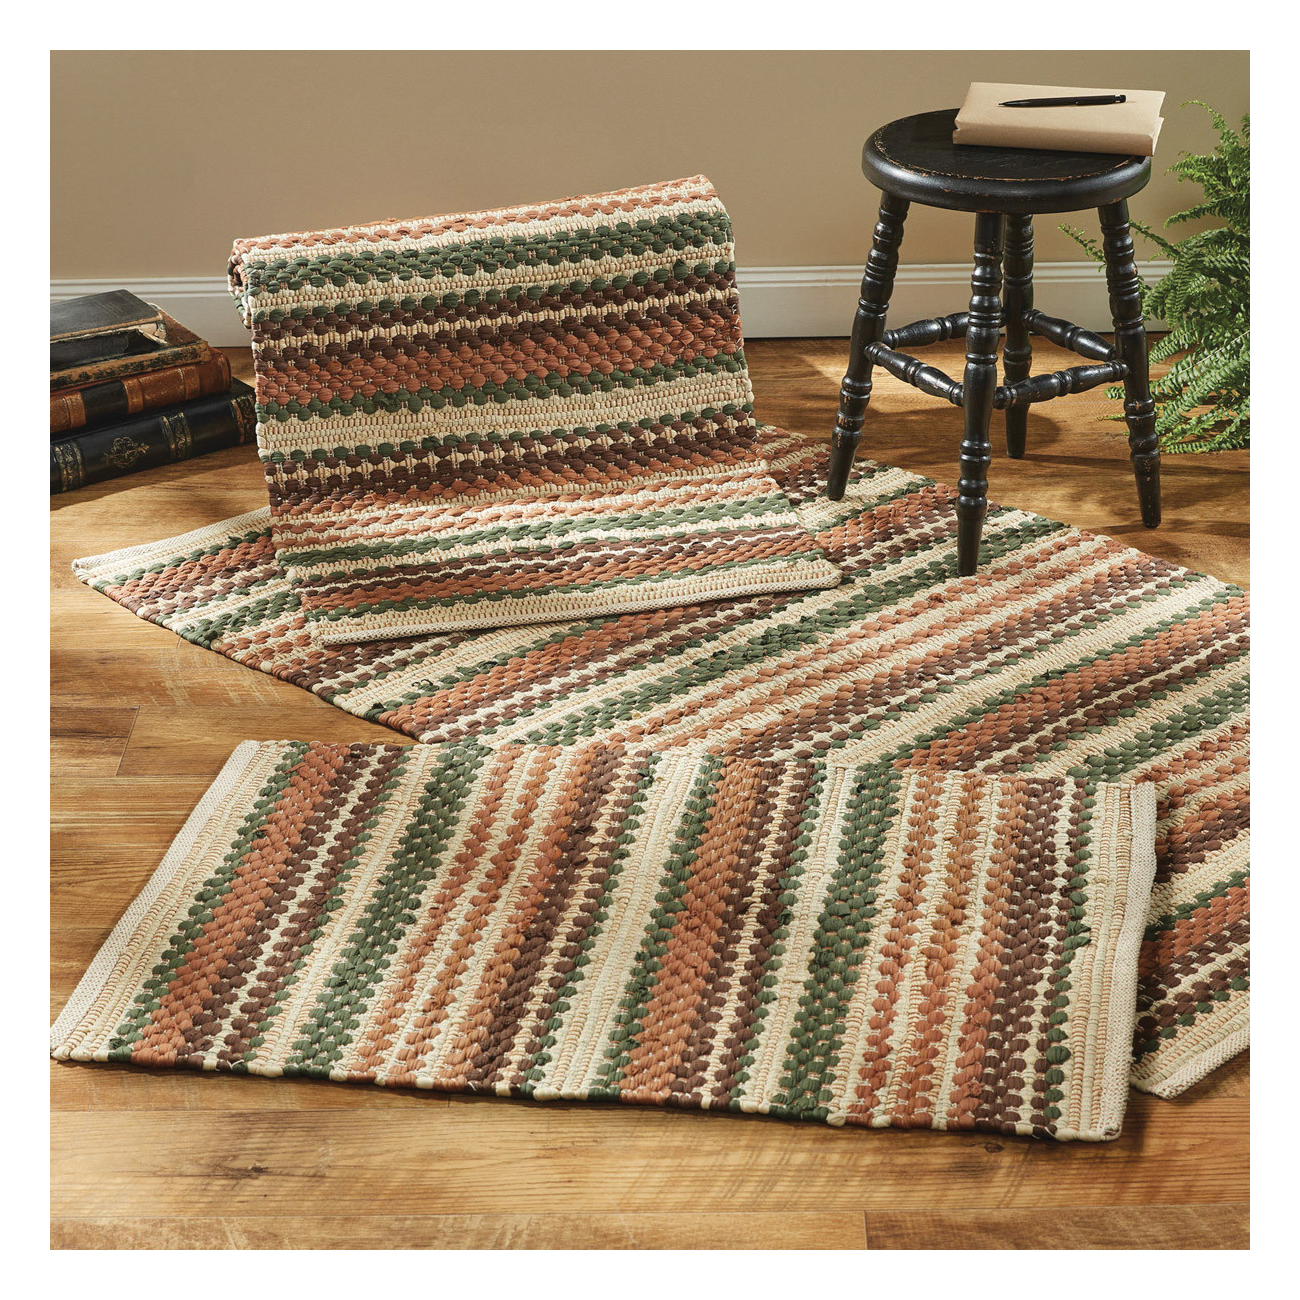 Park Designs 4955-250 Rug, 3 ft L, 2 ft W, Chindi Cotton, Carrot/Oatmeal/Sage/Tinderbox Brown - 2